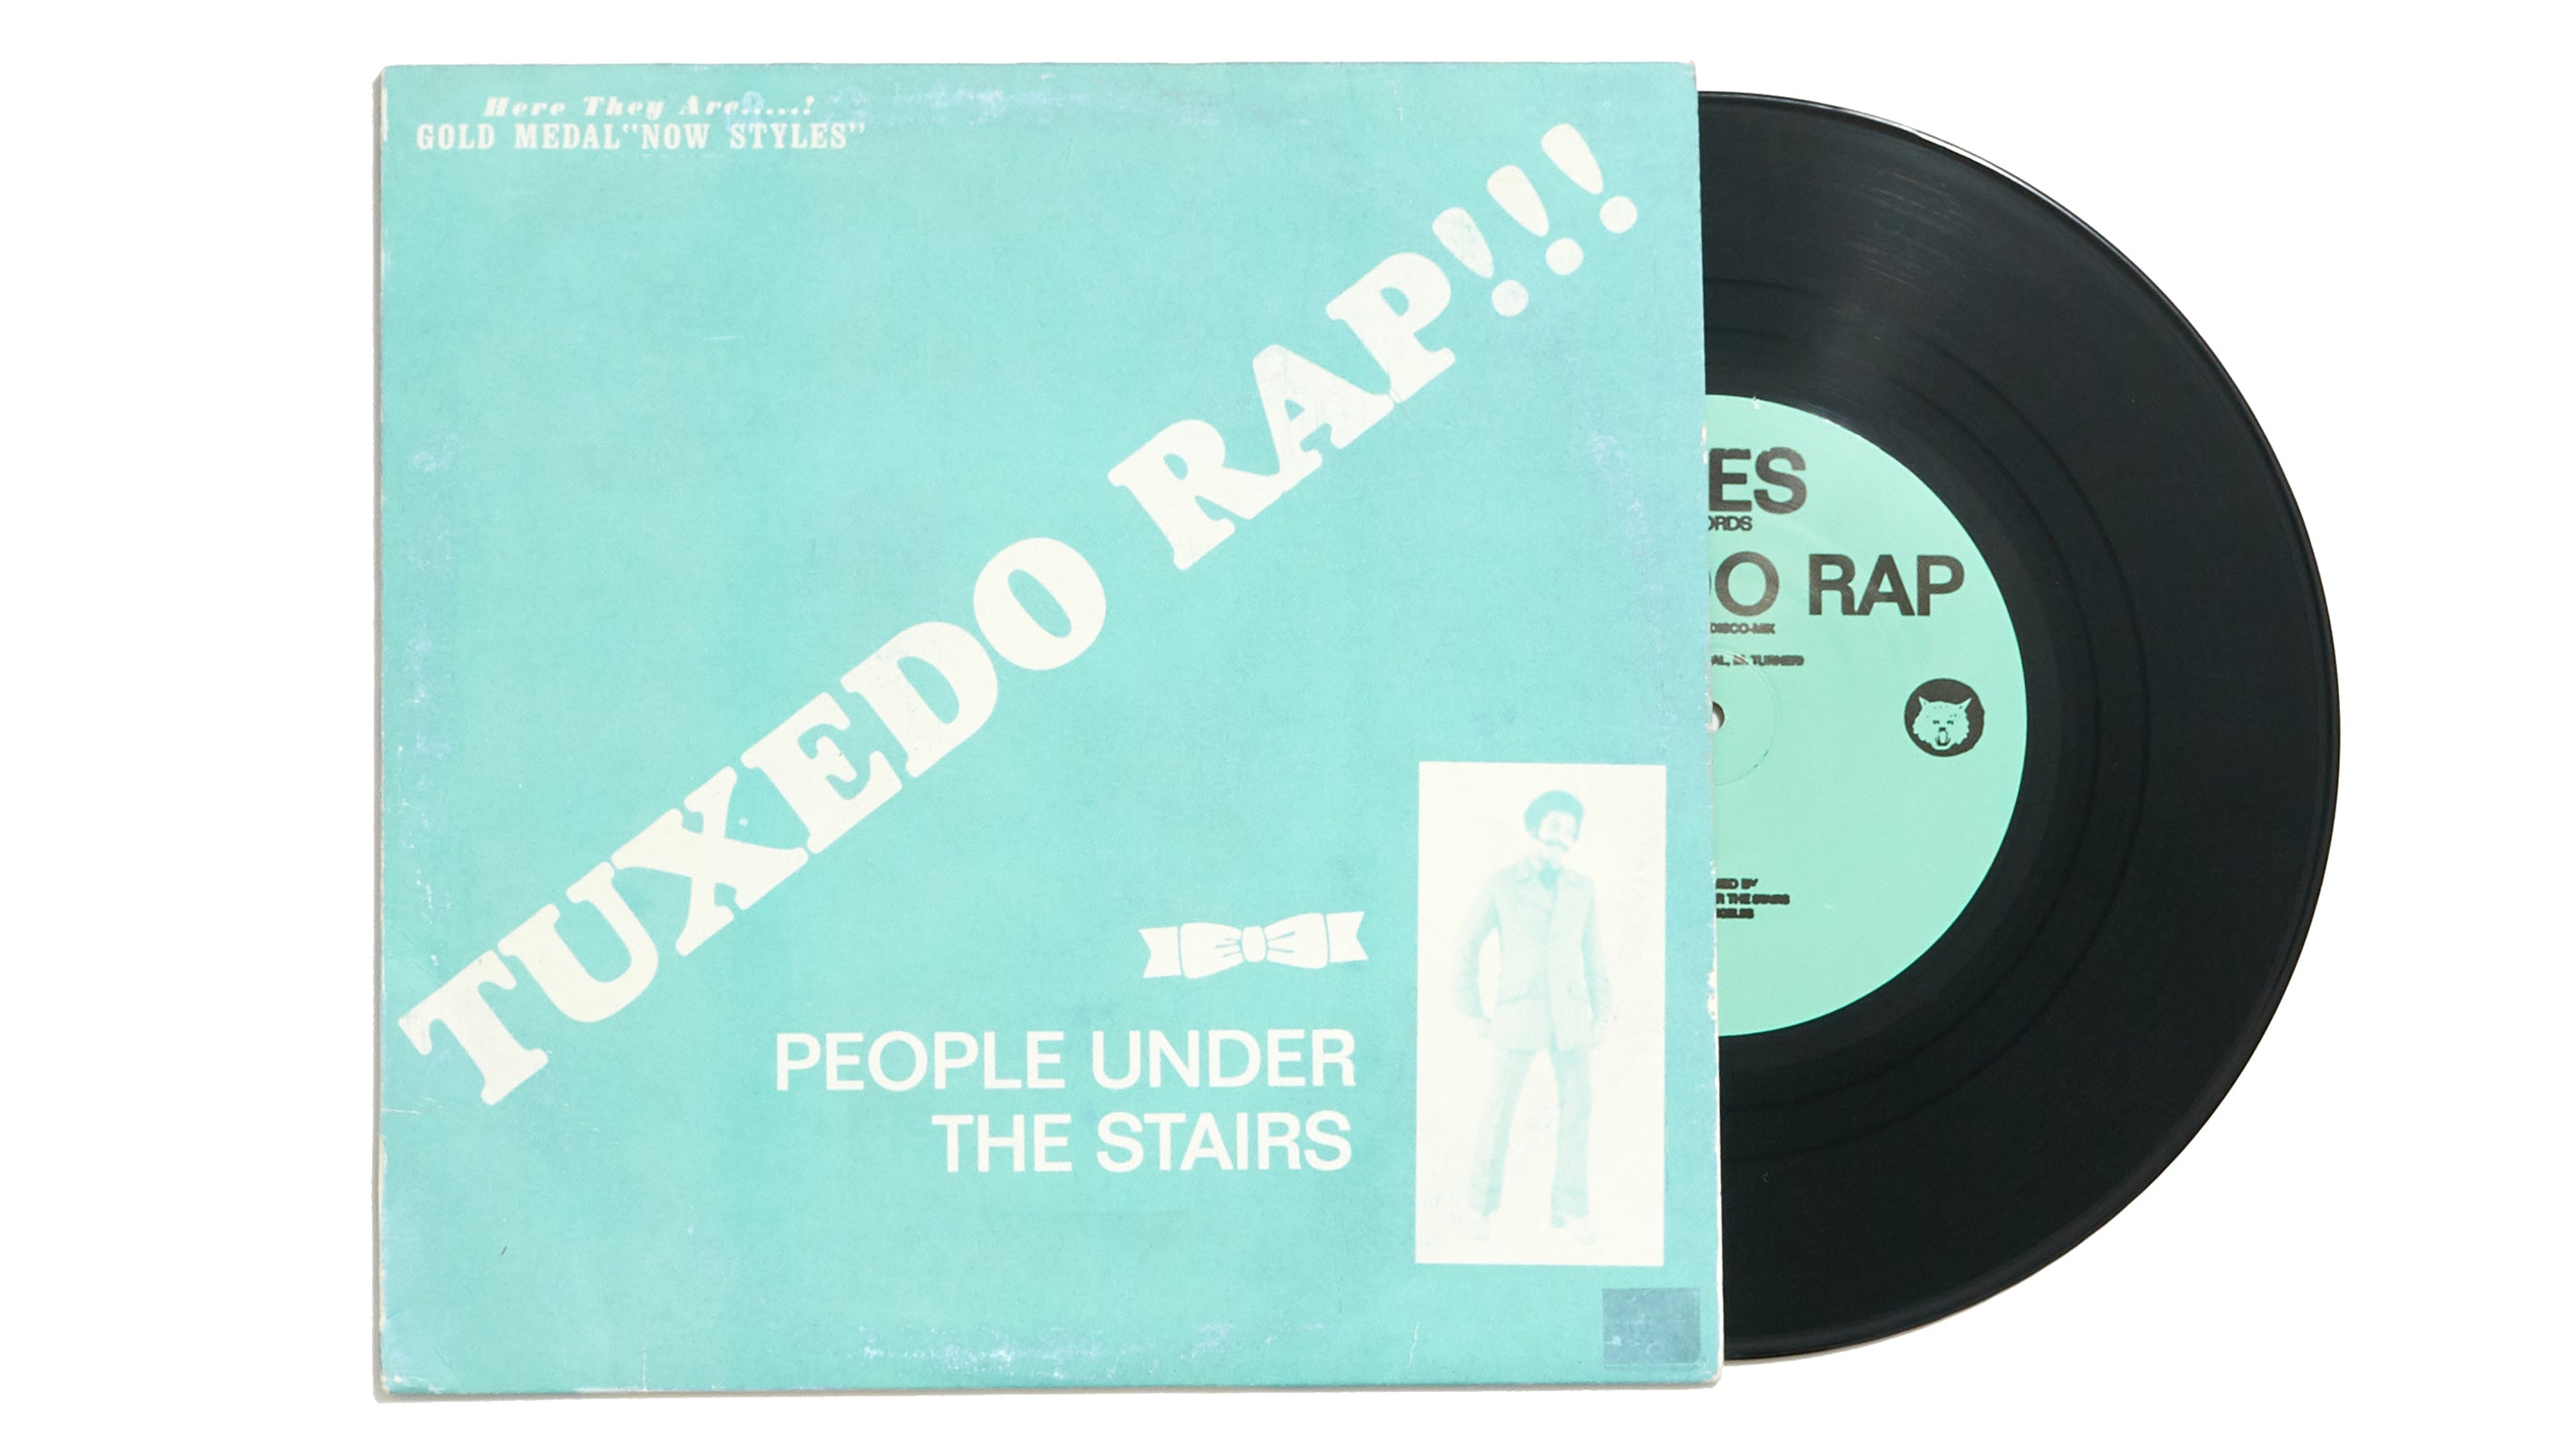 People Under The Stairs "Tuxedo Rap" (12")